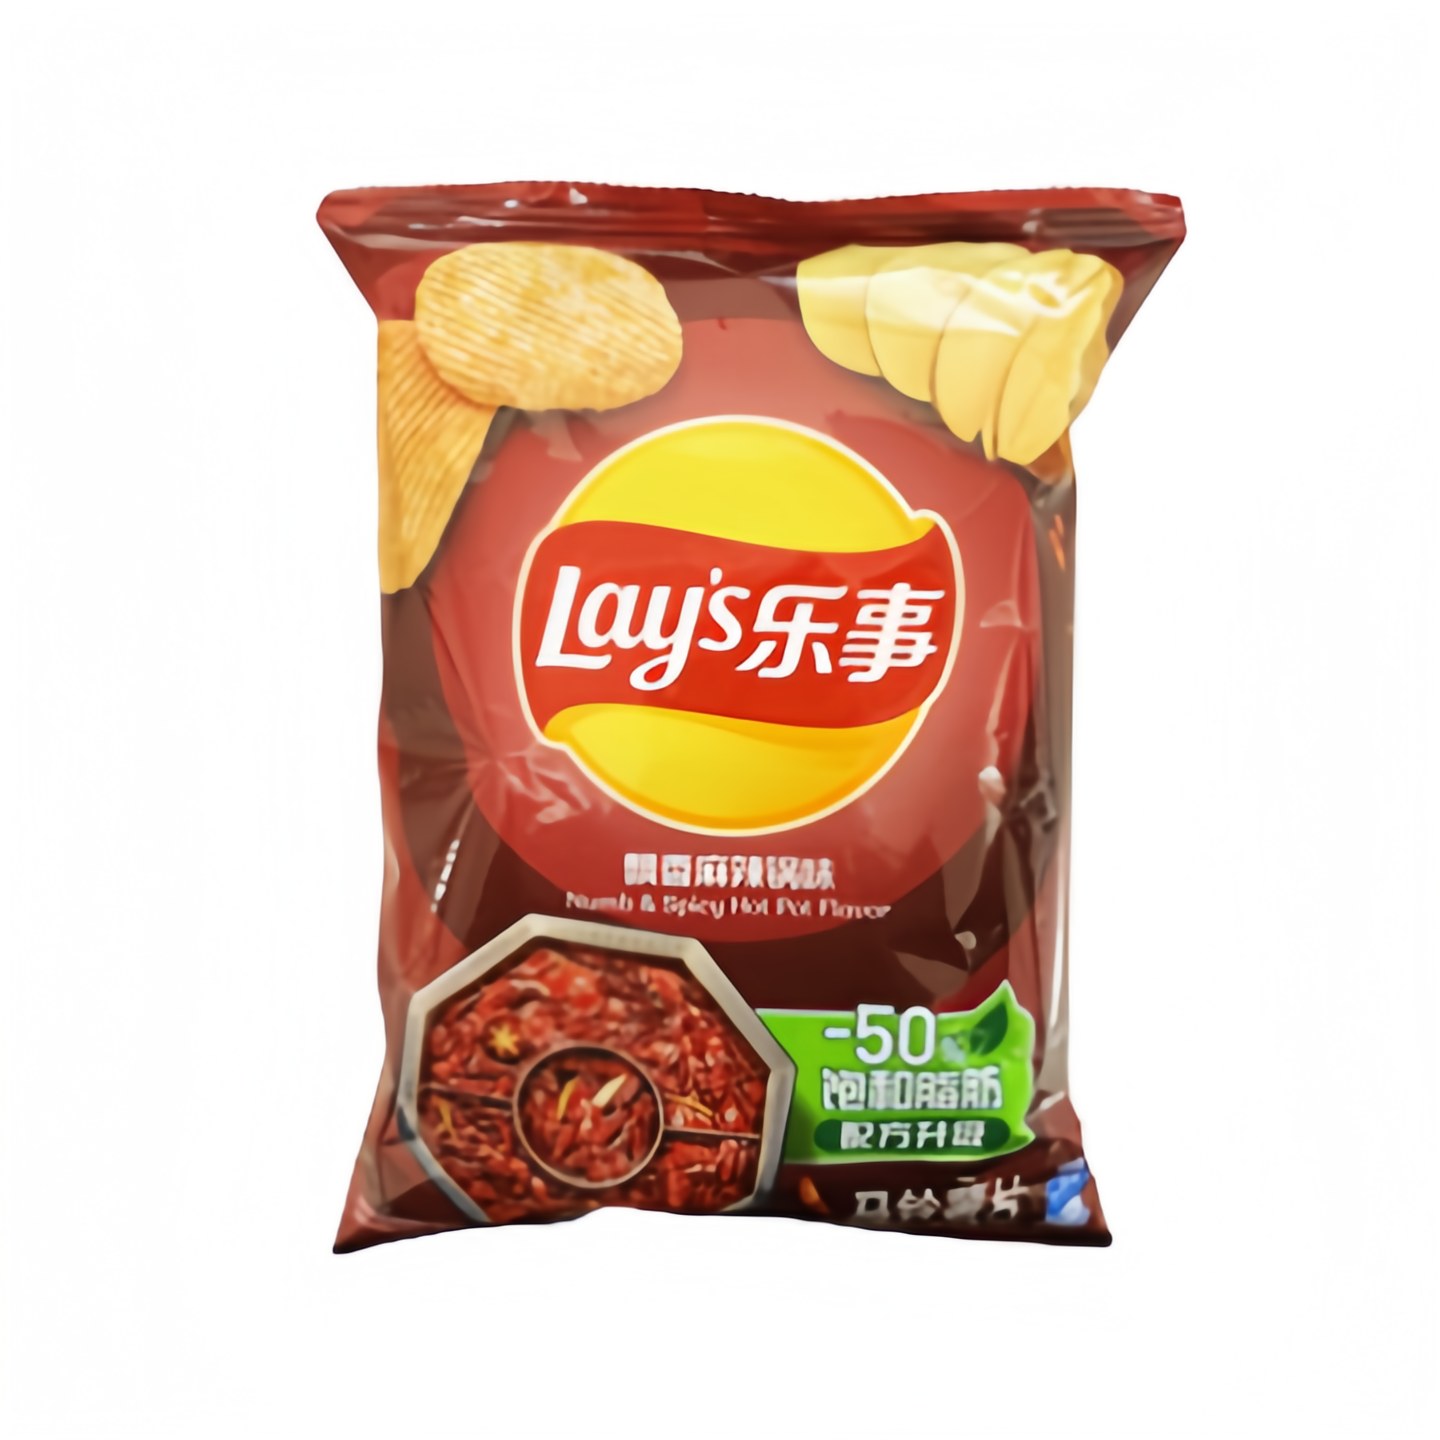 Potato chips-Spicy Hotpot flavor 70g Lays China